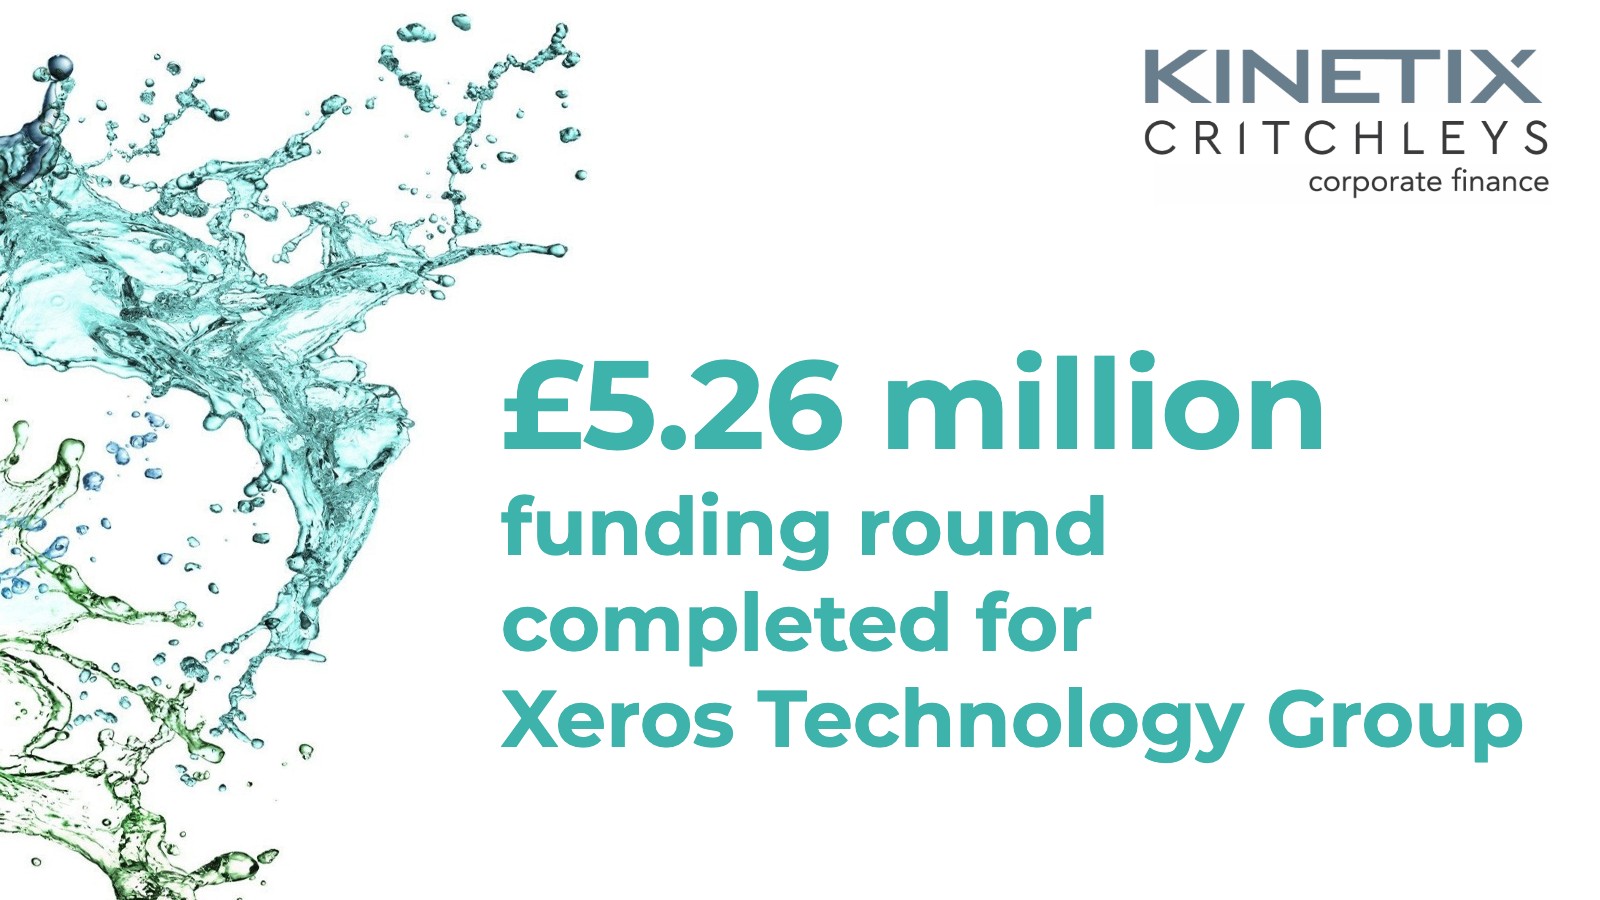 £5.26m raised for Xeros Technology Group